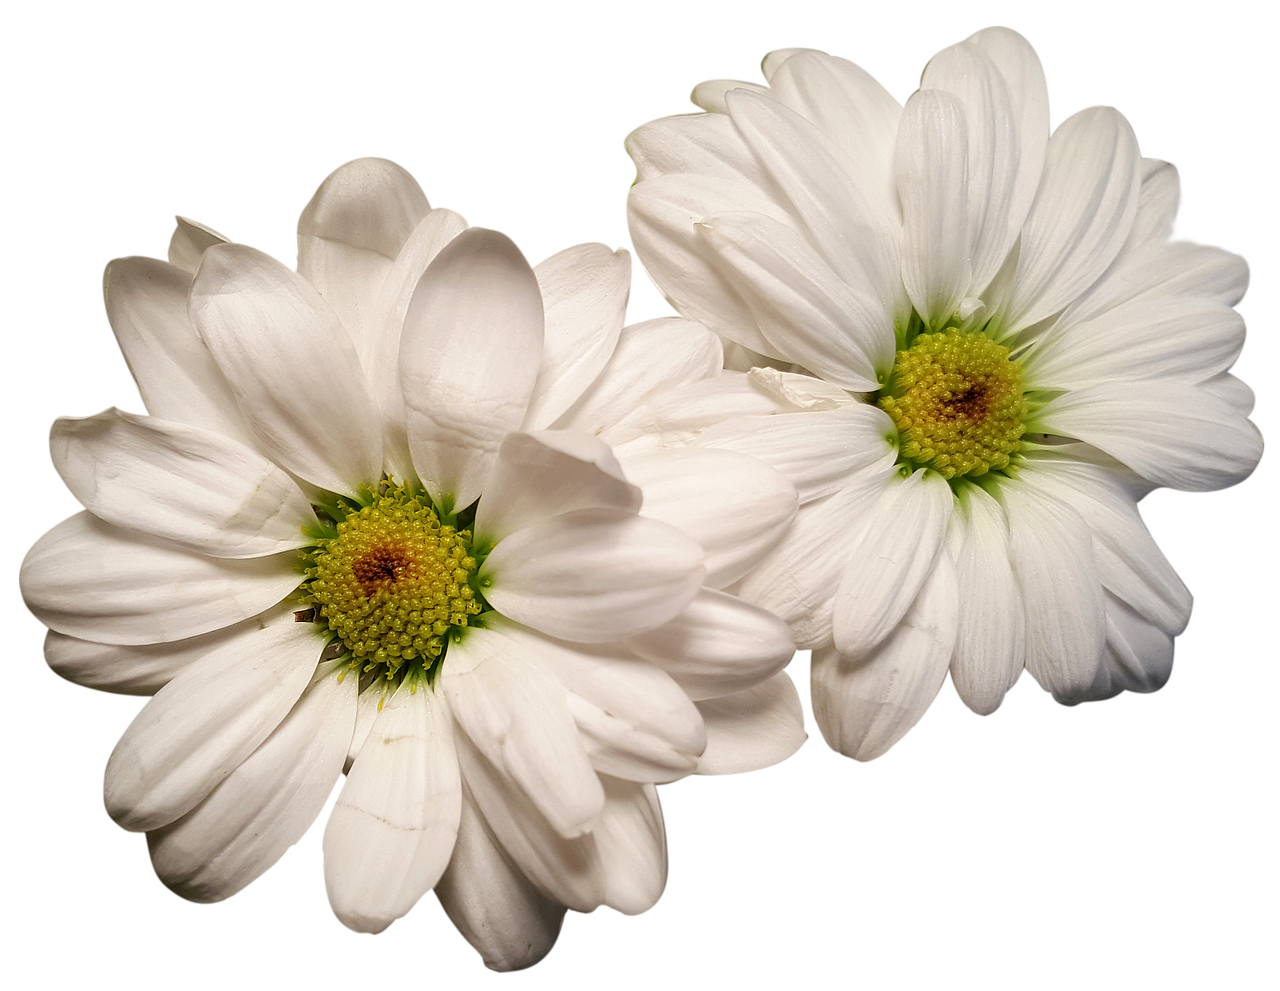 daisies exposed flower heads free photo